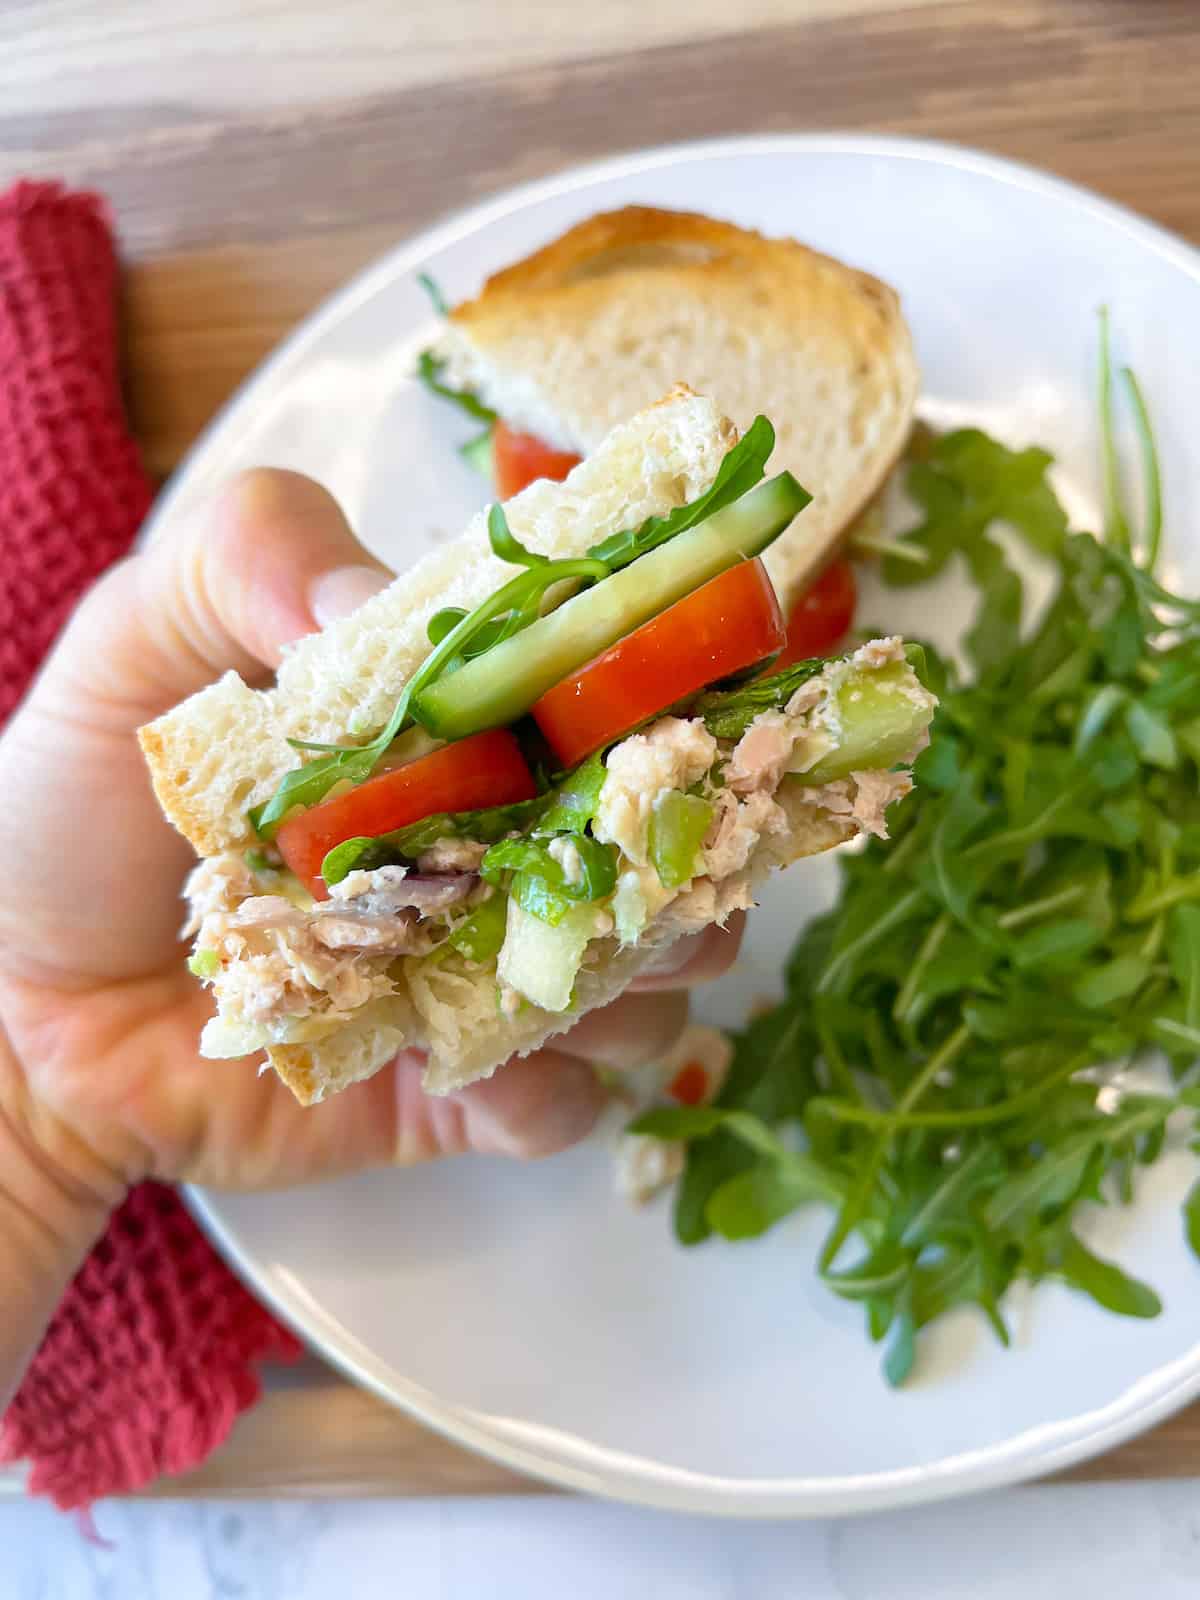 dairy free tuna salad on sourdough with 2 slices of bread